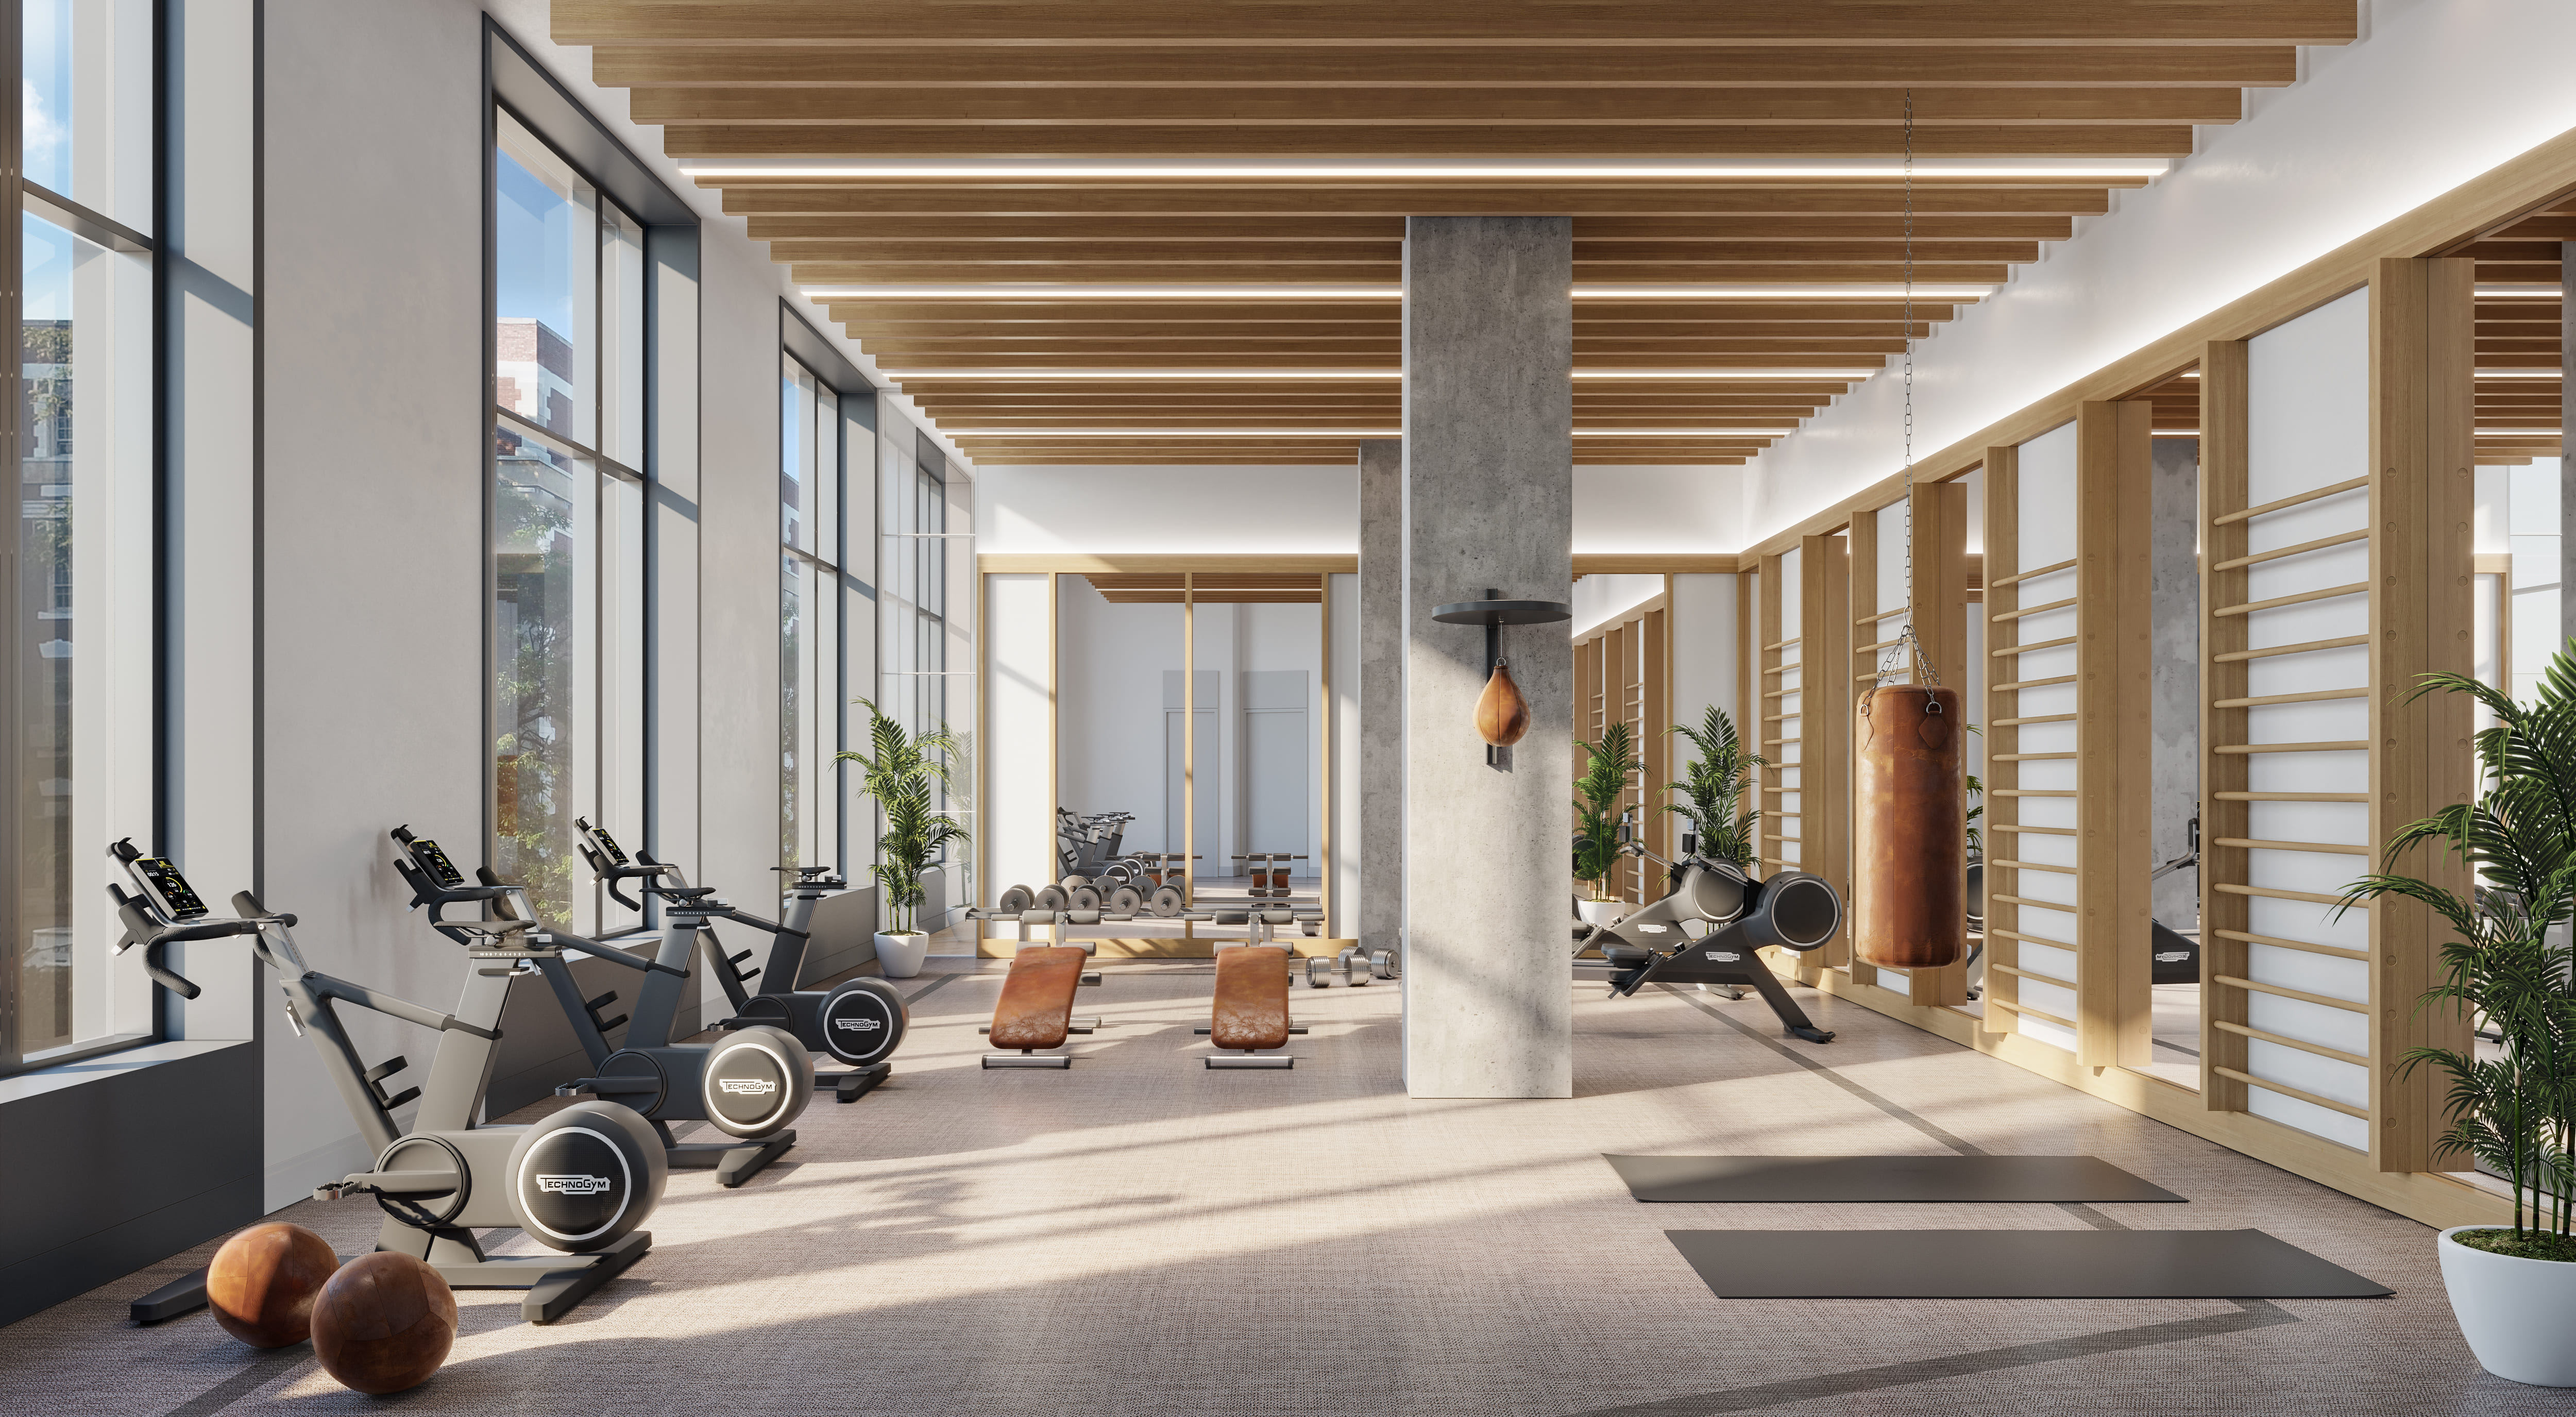 Indoor gym at NOVA LIC condos for sale. Open area surrounded by gym equipment with sun coming through windows.